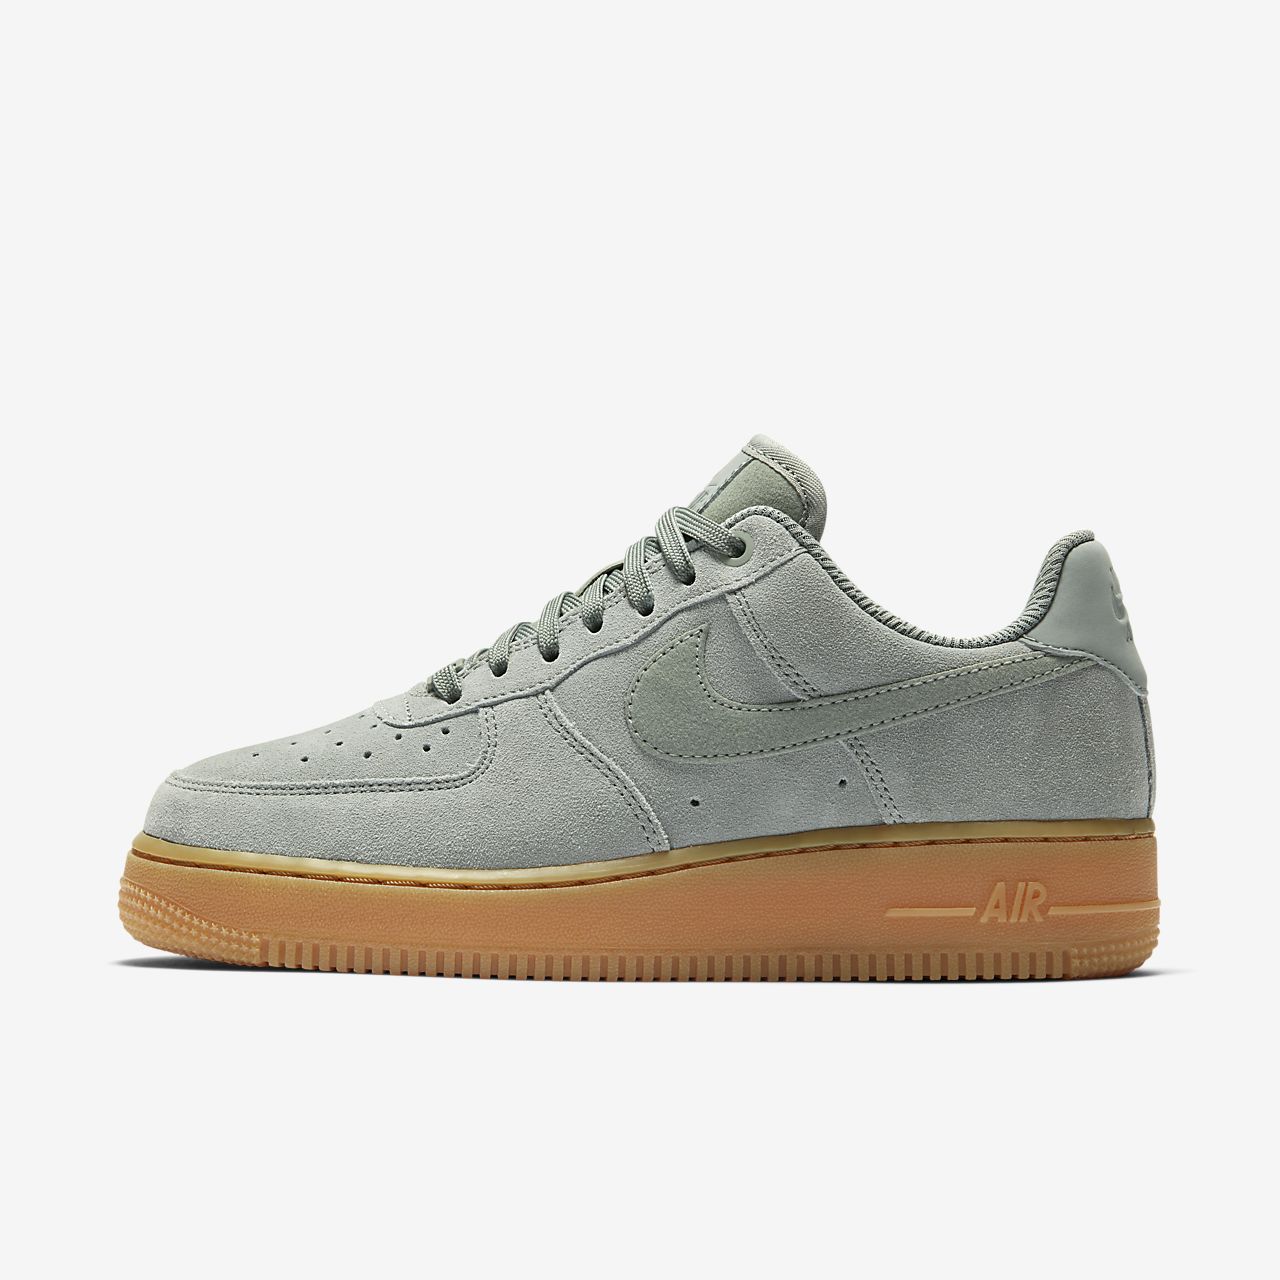 Chaussure Nike Air Force 1 07 SE pour Femme